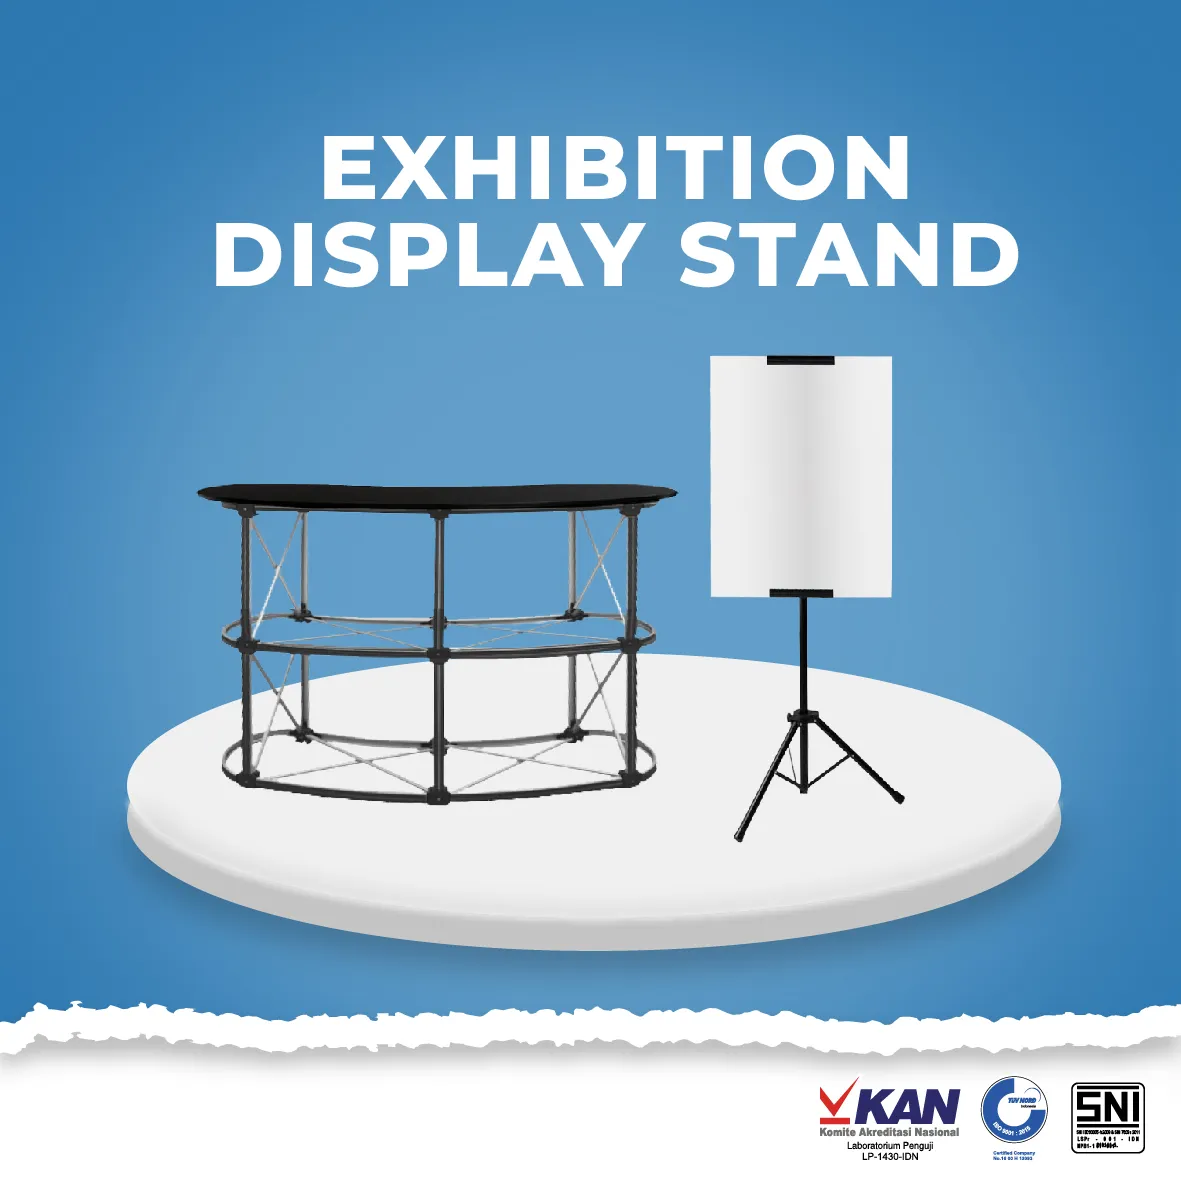  Exhibition Display Stand non fan template cover website 03